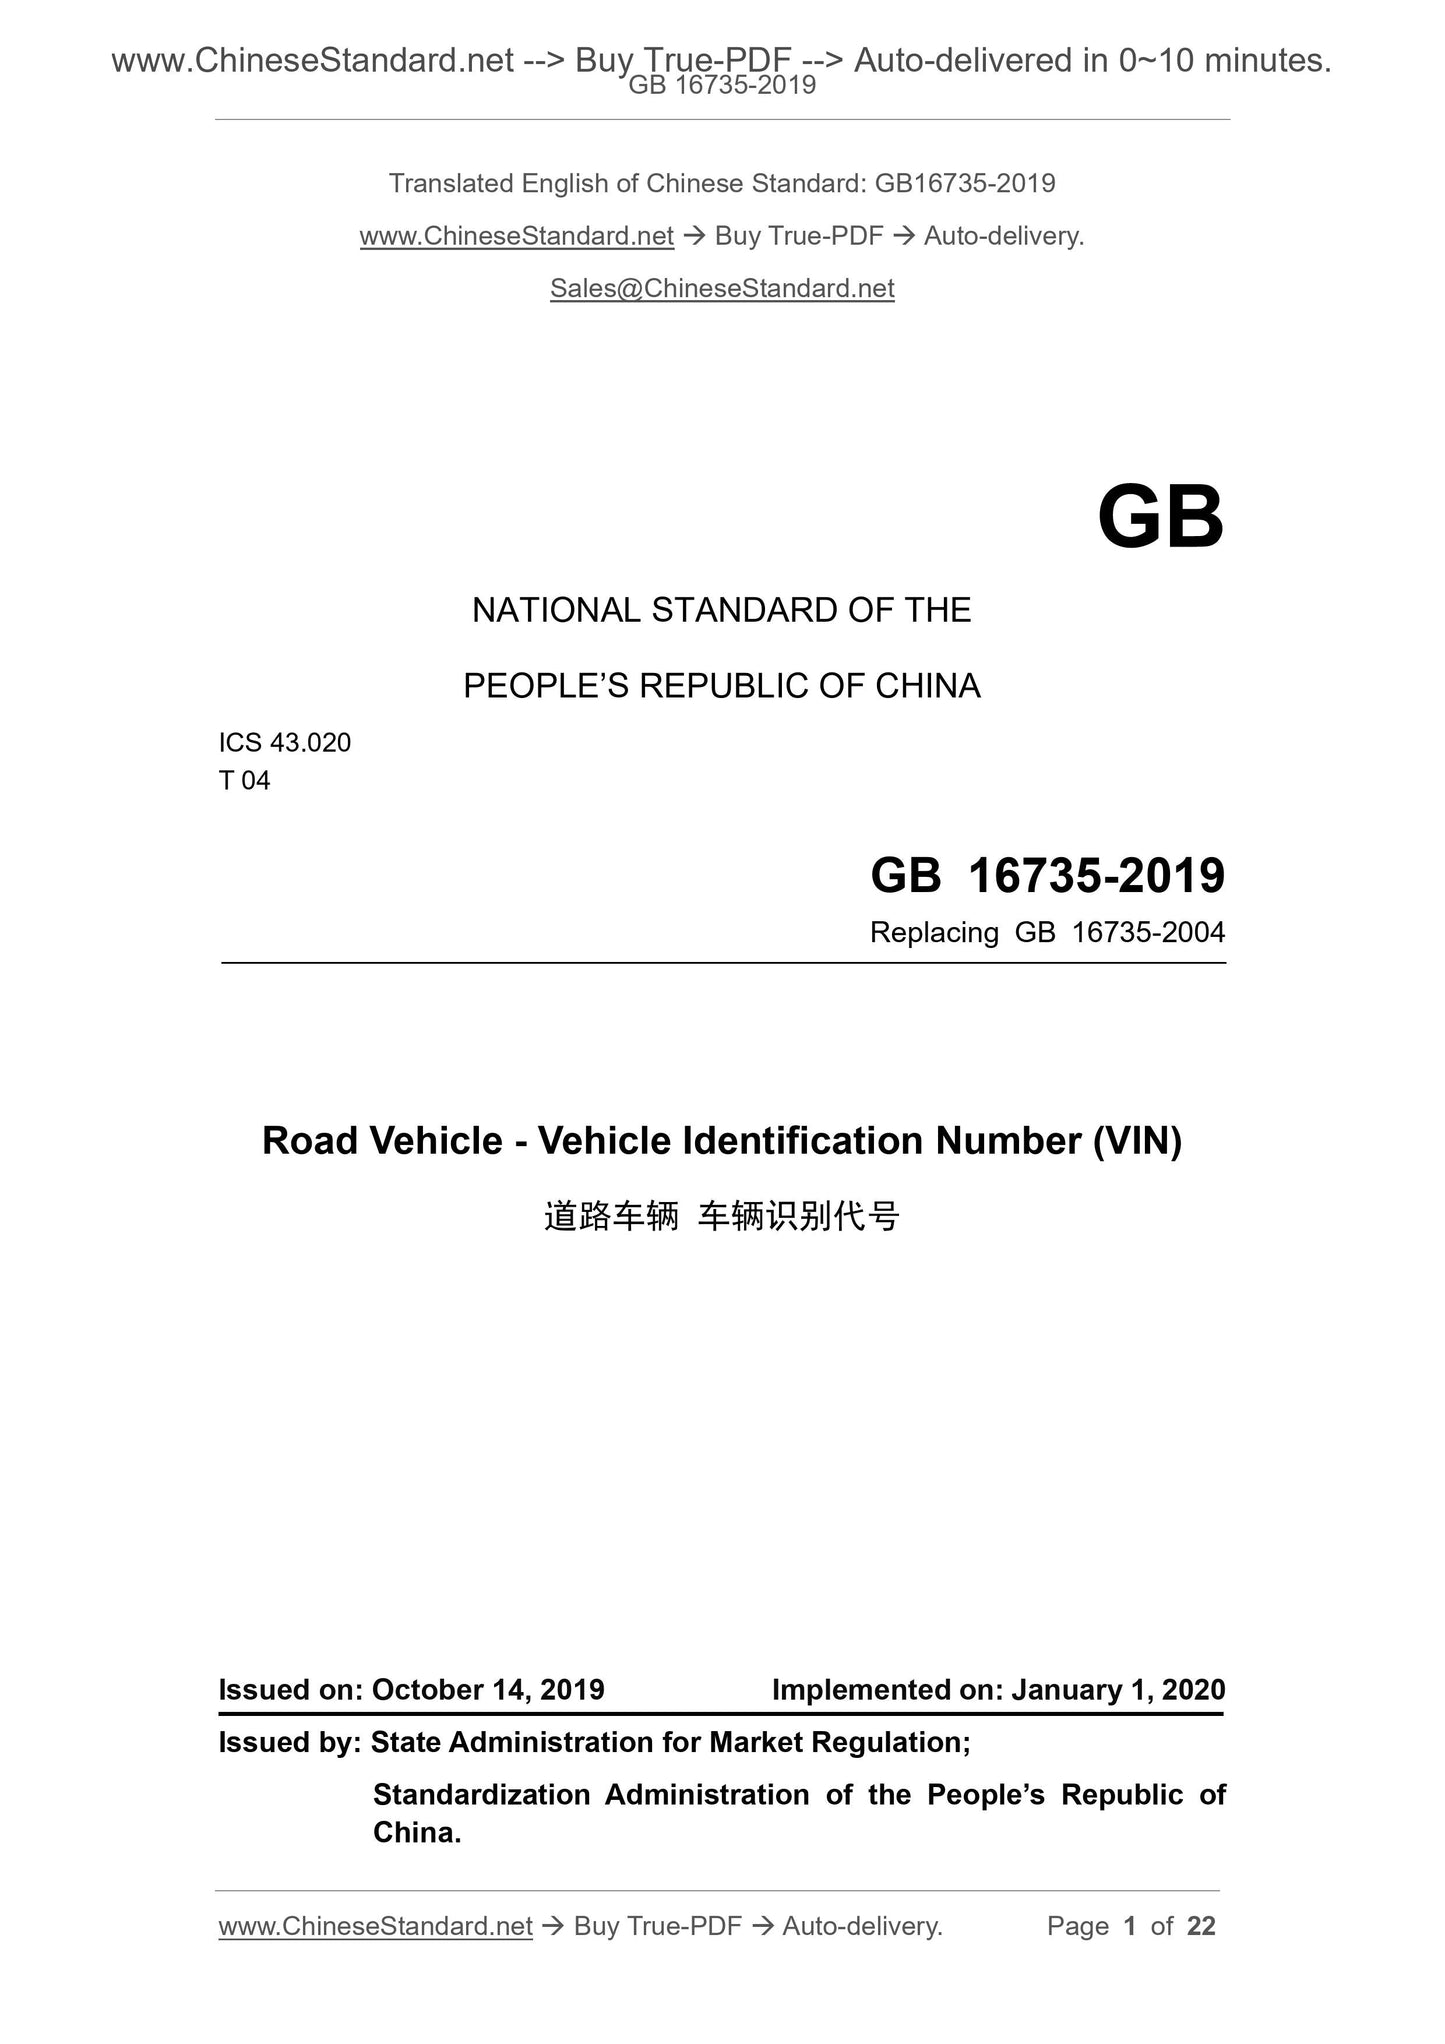 GB 16735-2019 Page 1